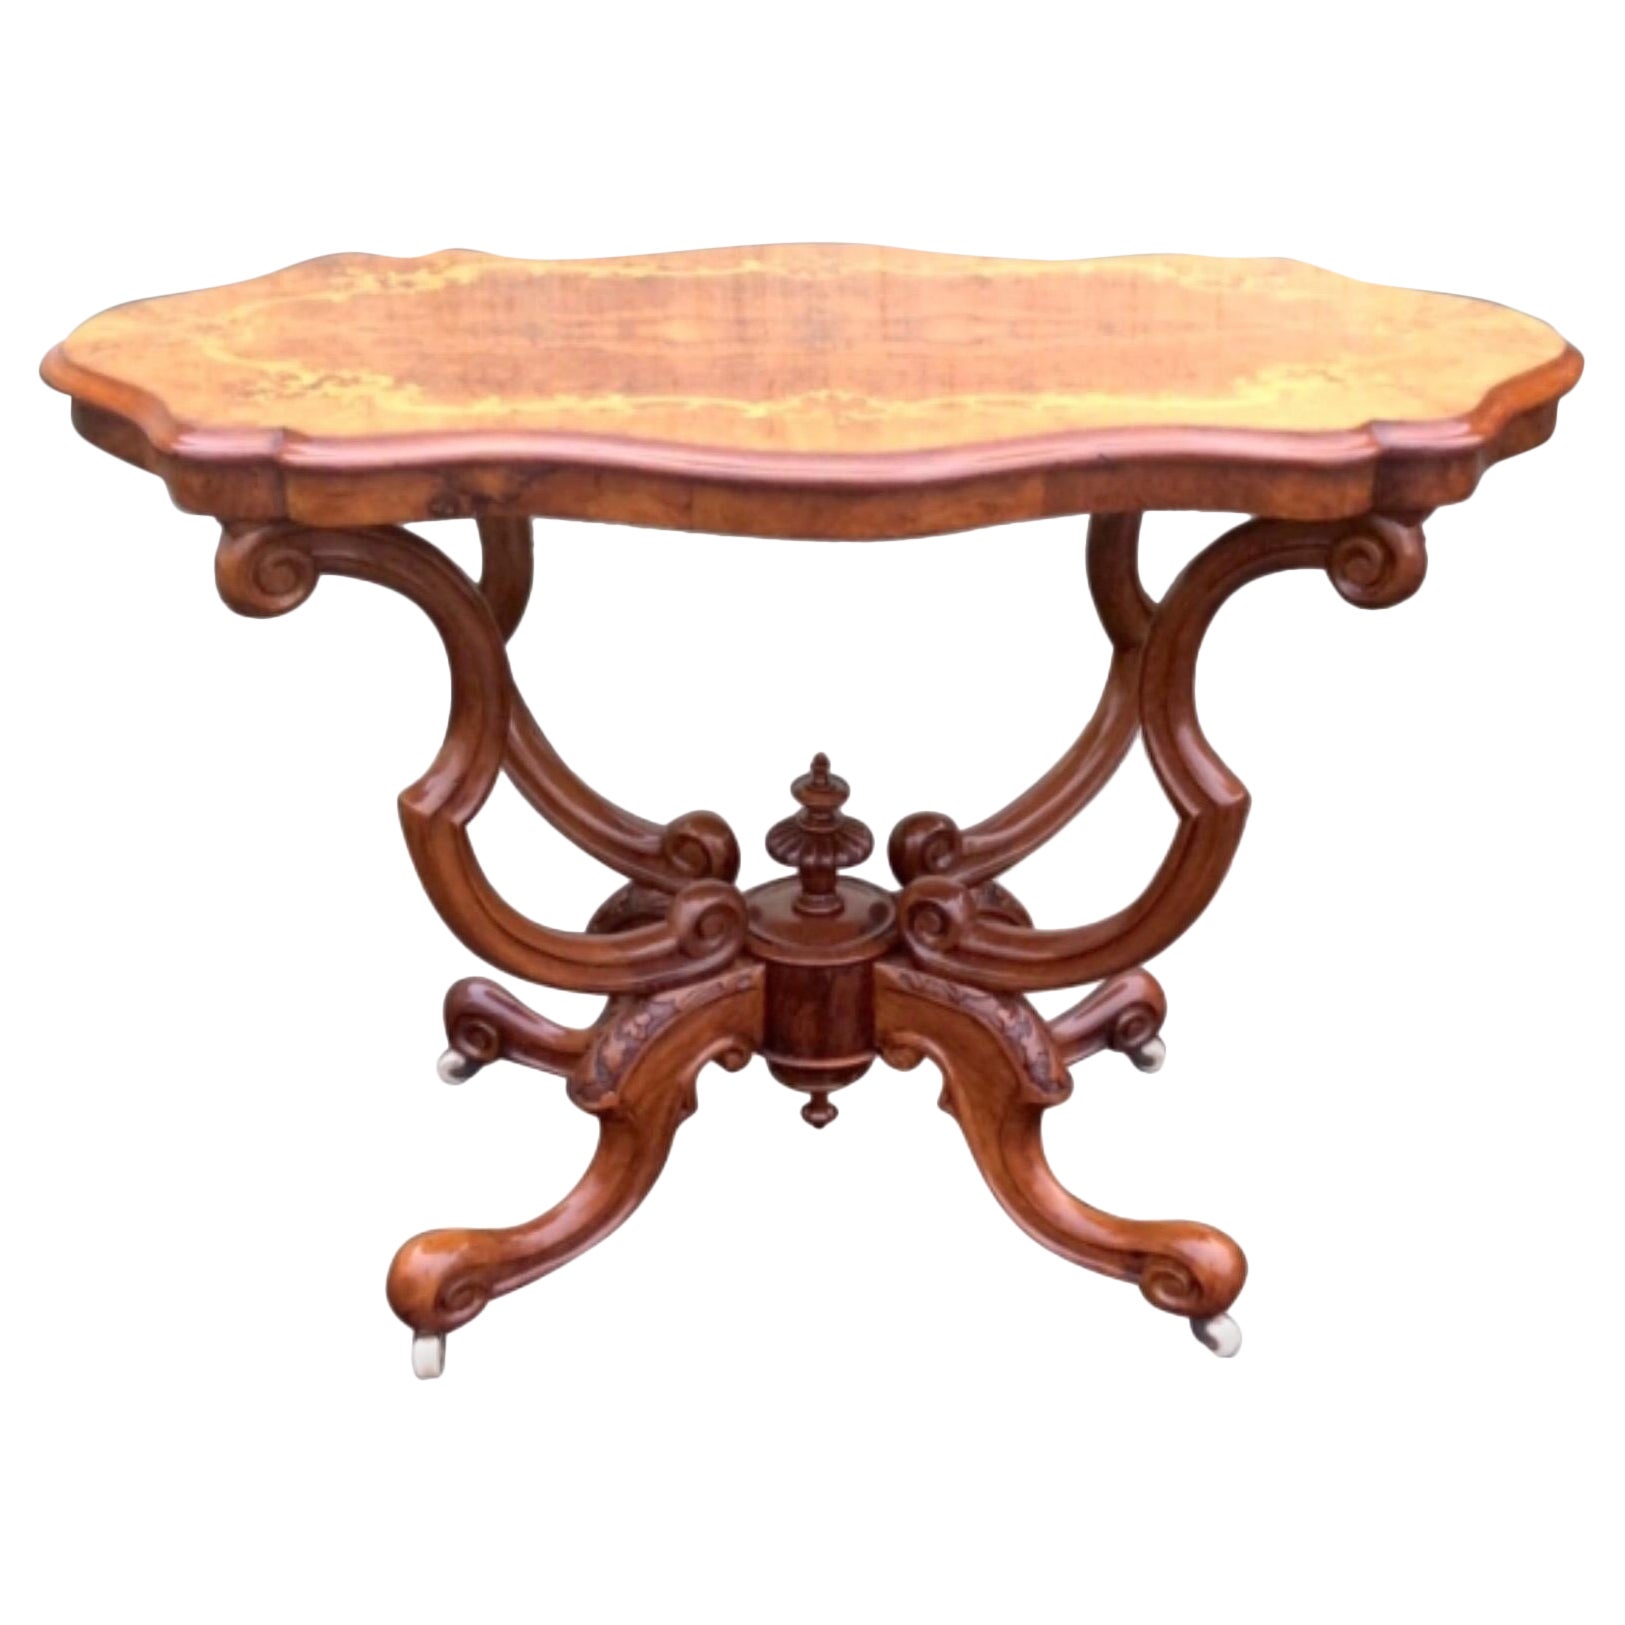 Antique Marquetry Inlaid Burr Walnut Window Table, Occasional Table